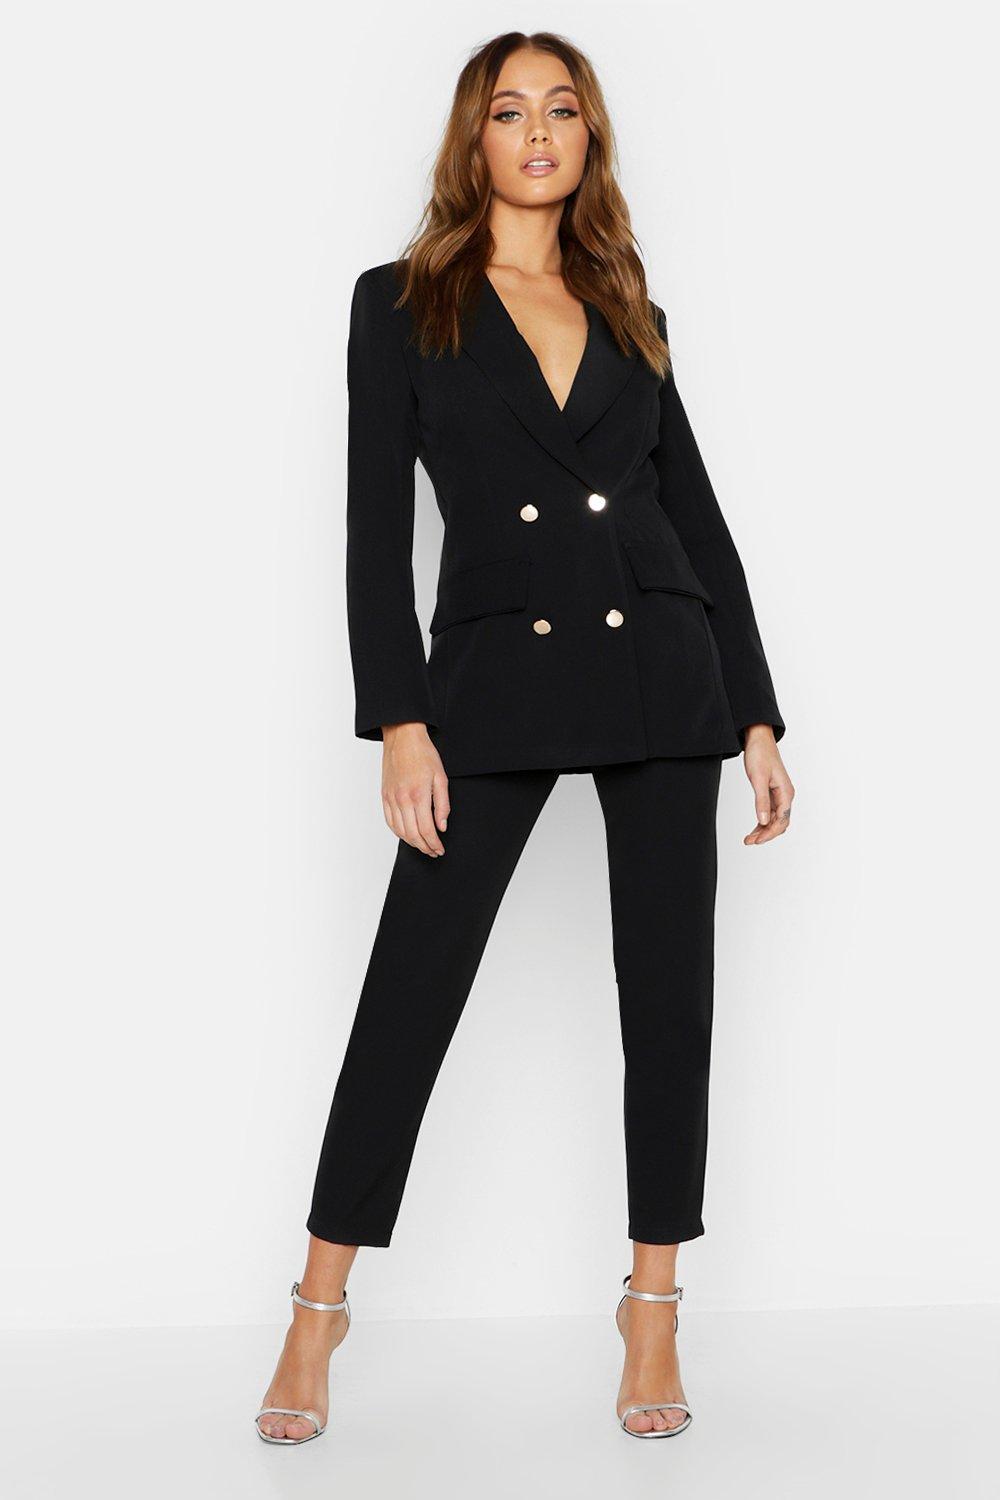 Boohoo Jersey Double Breasted Blazer And Trouser Suit Set in Black | Lyst